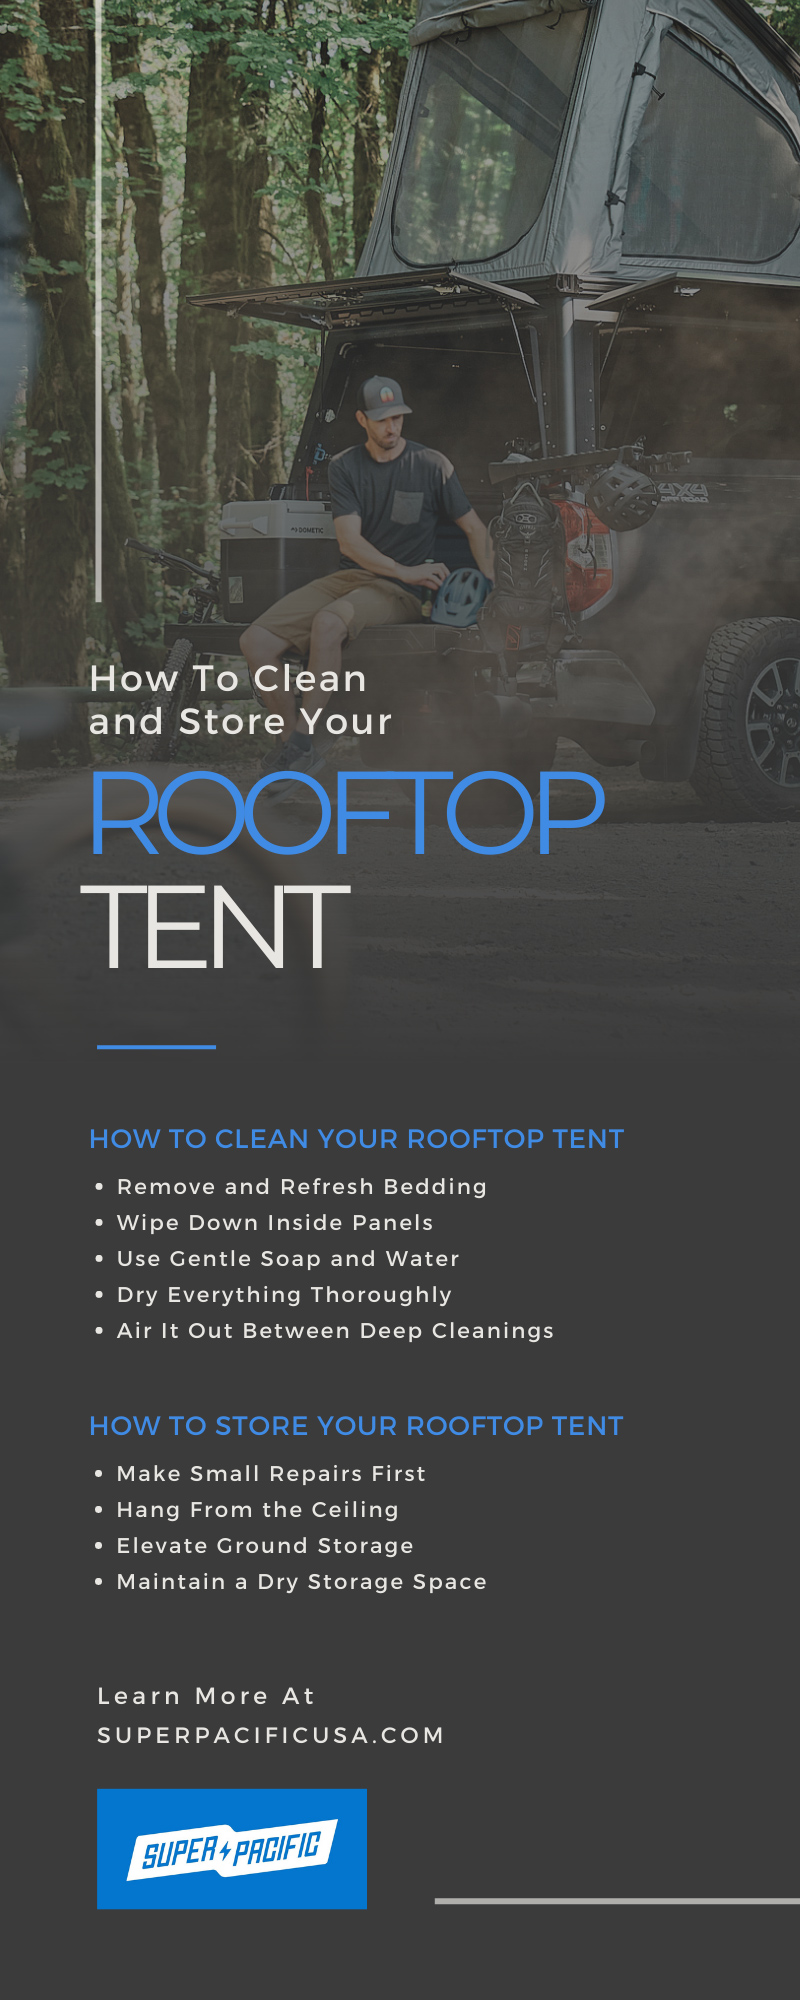 How To Clean and Store Your Rooftop Tent